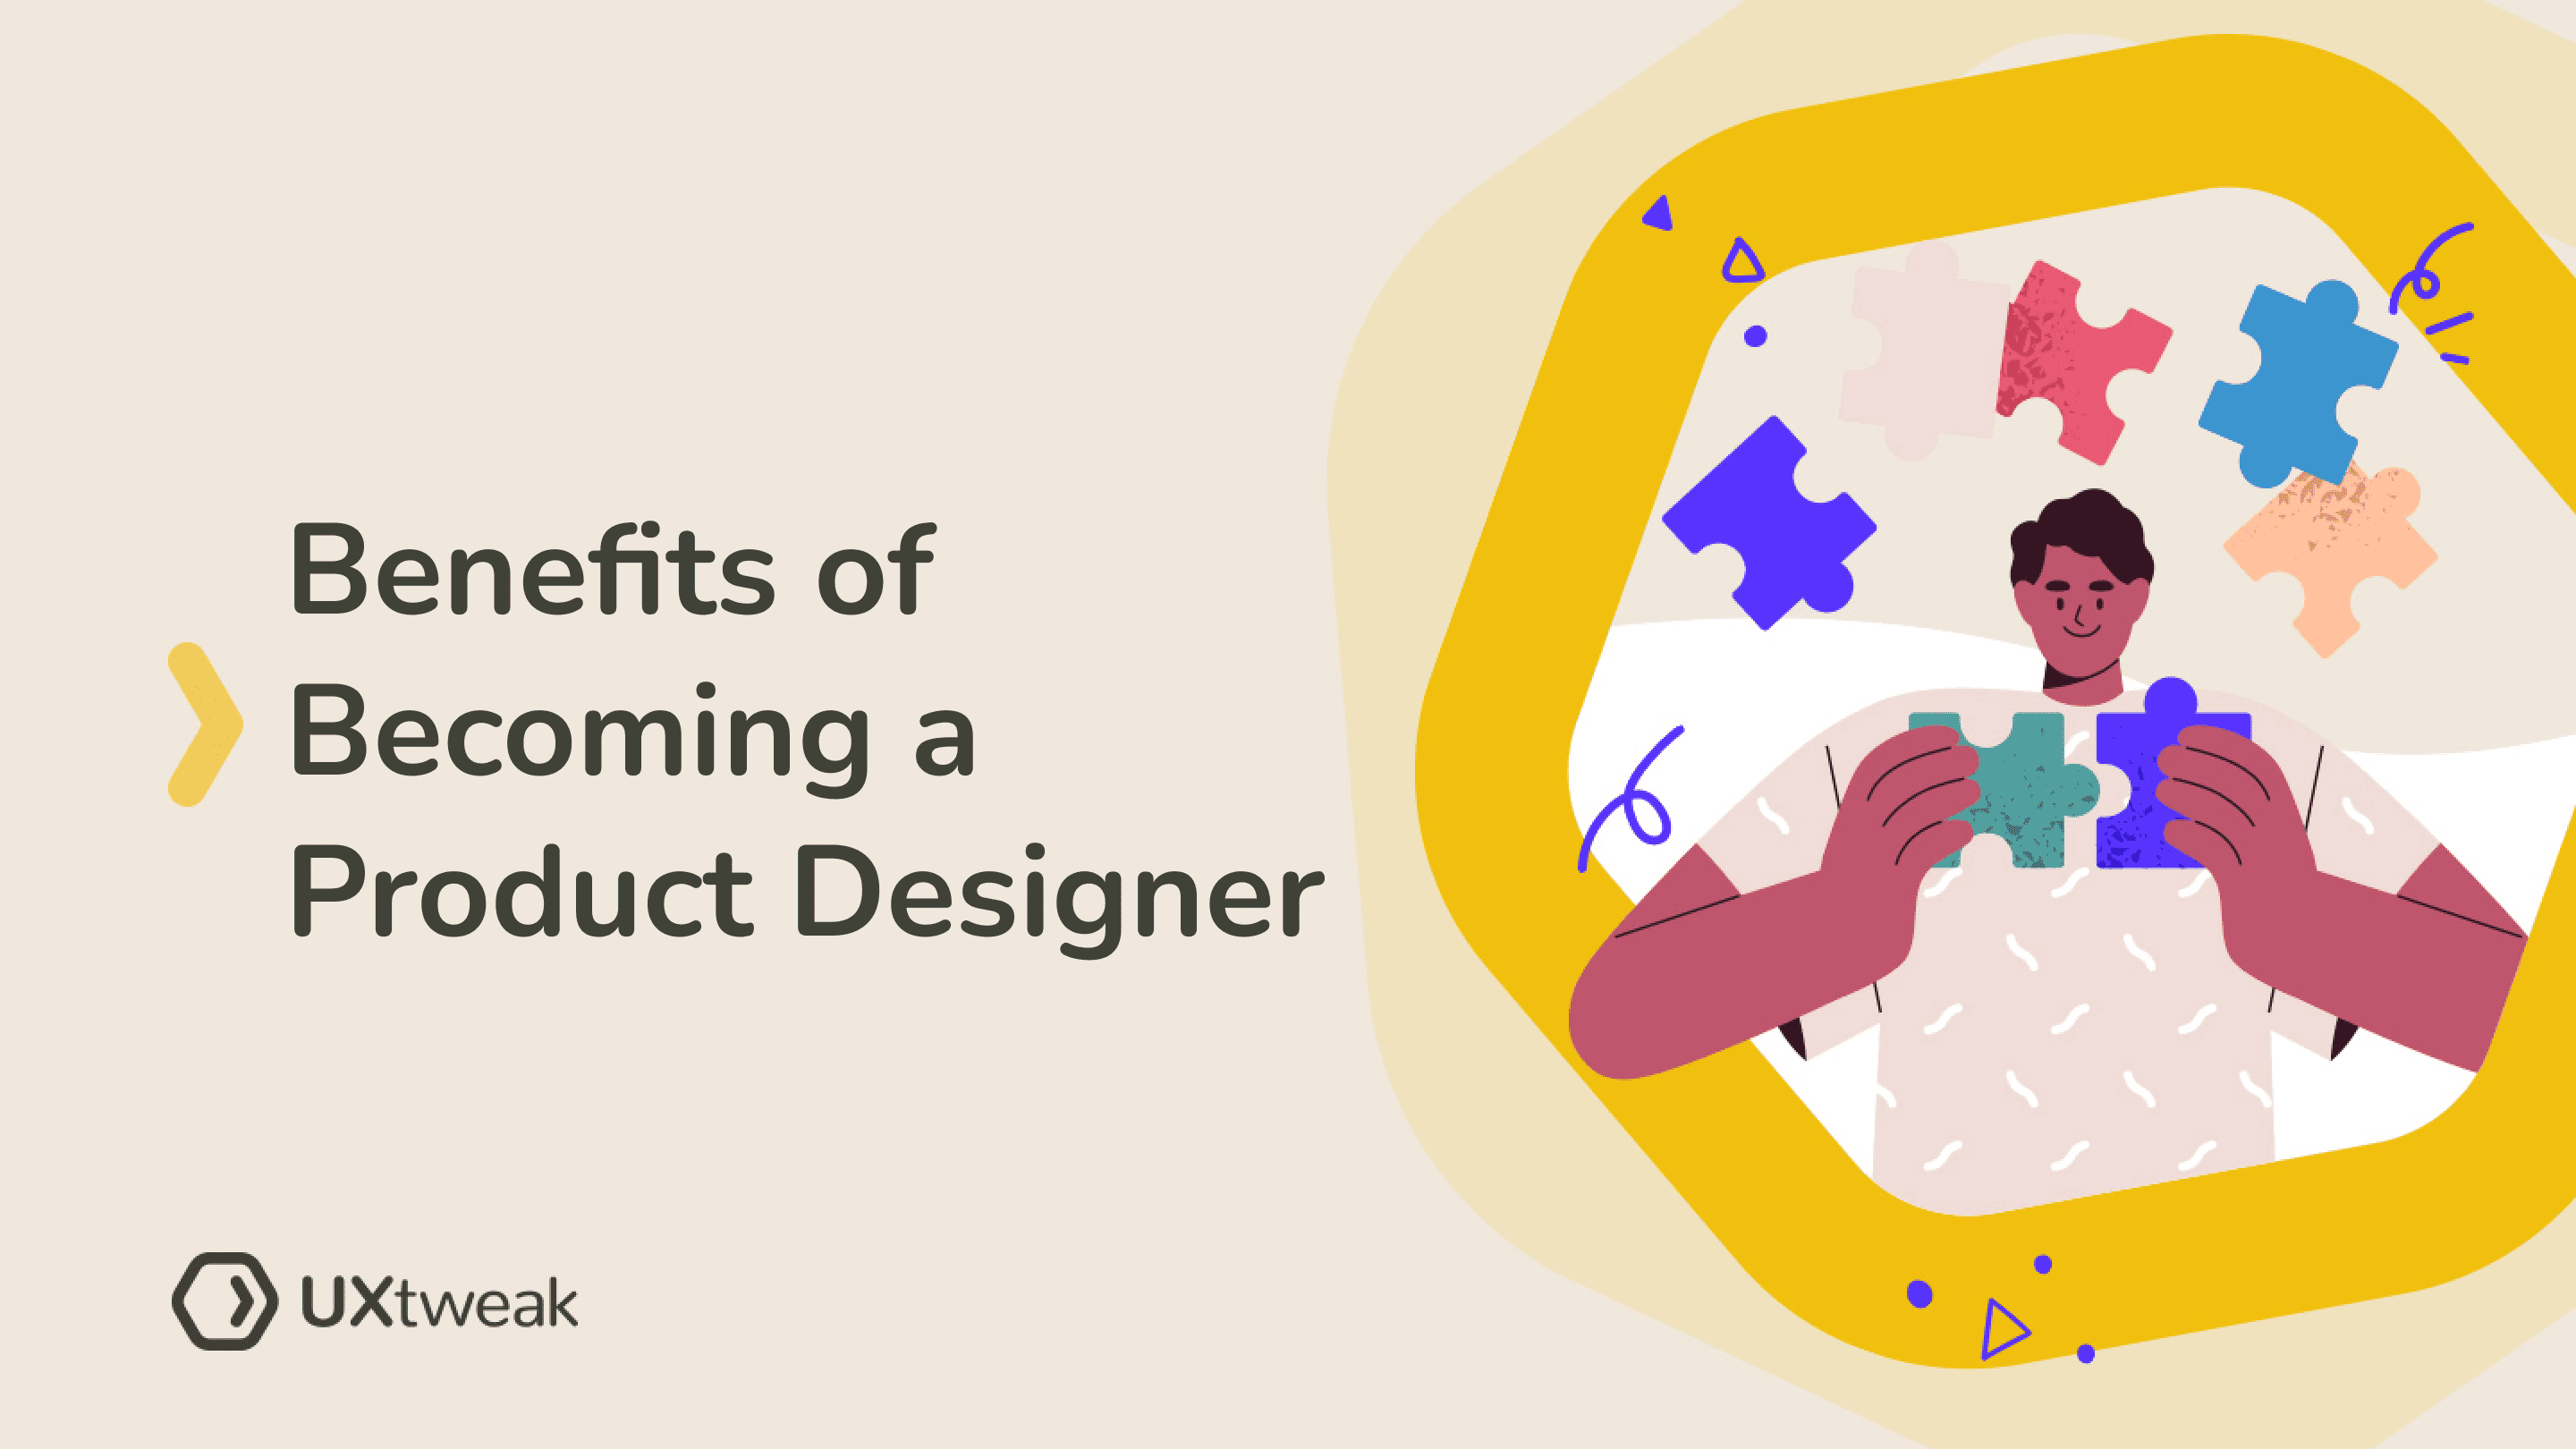 5 Benefits of Becoming a Product Designer